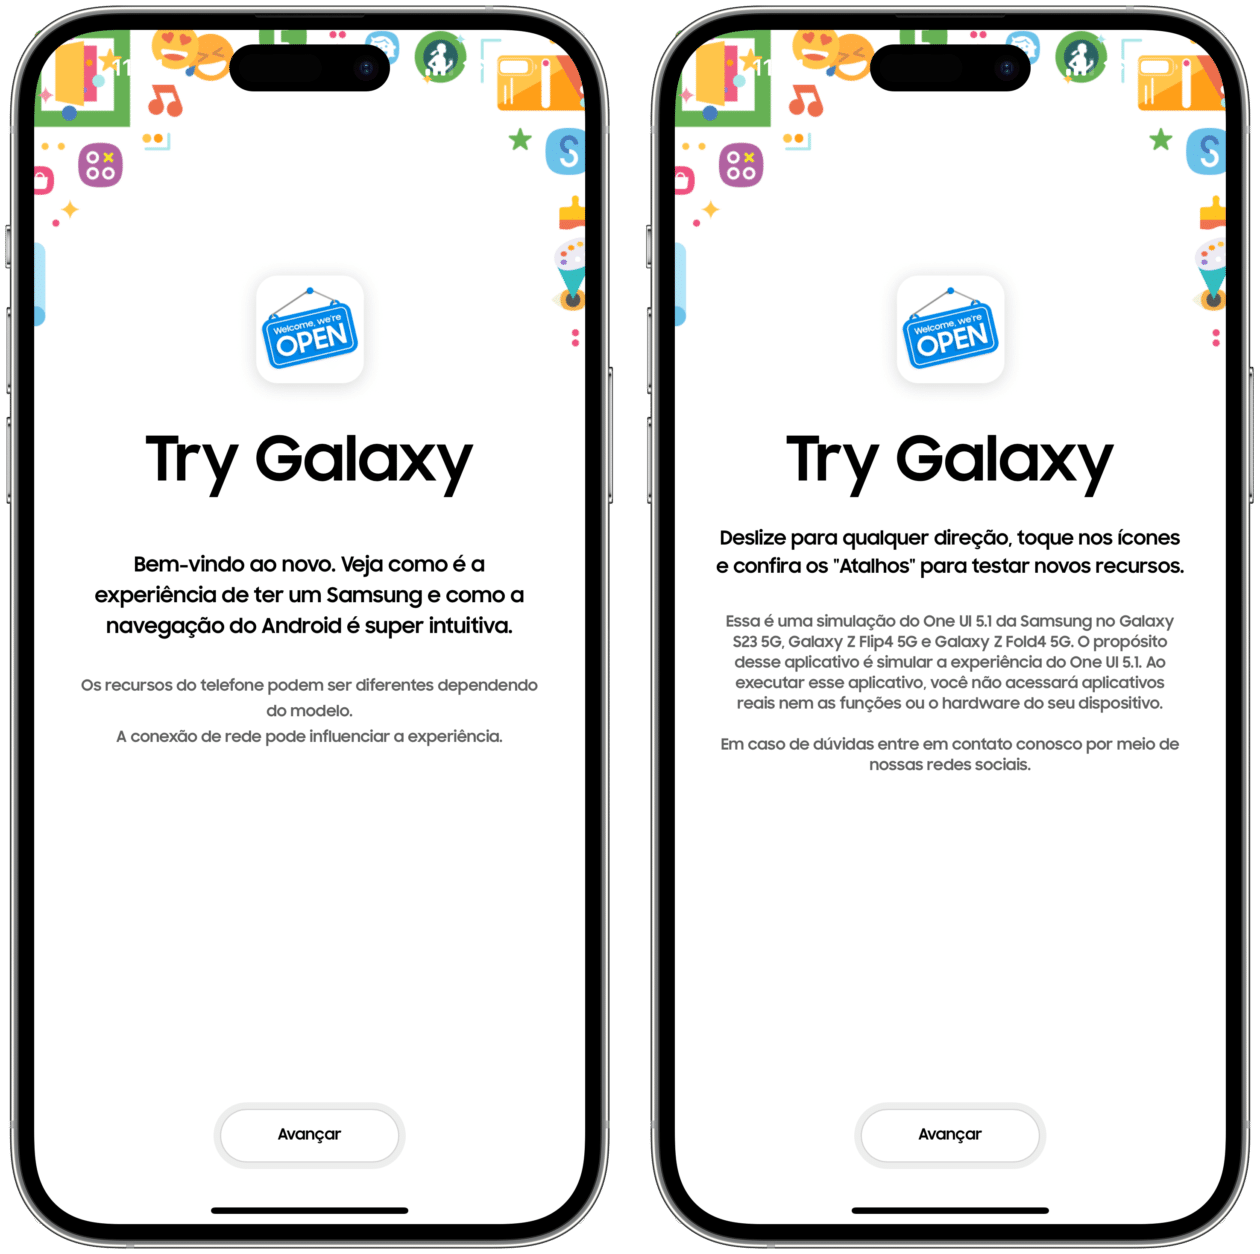 Try Galaxy no iPhone